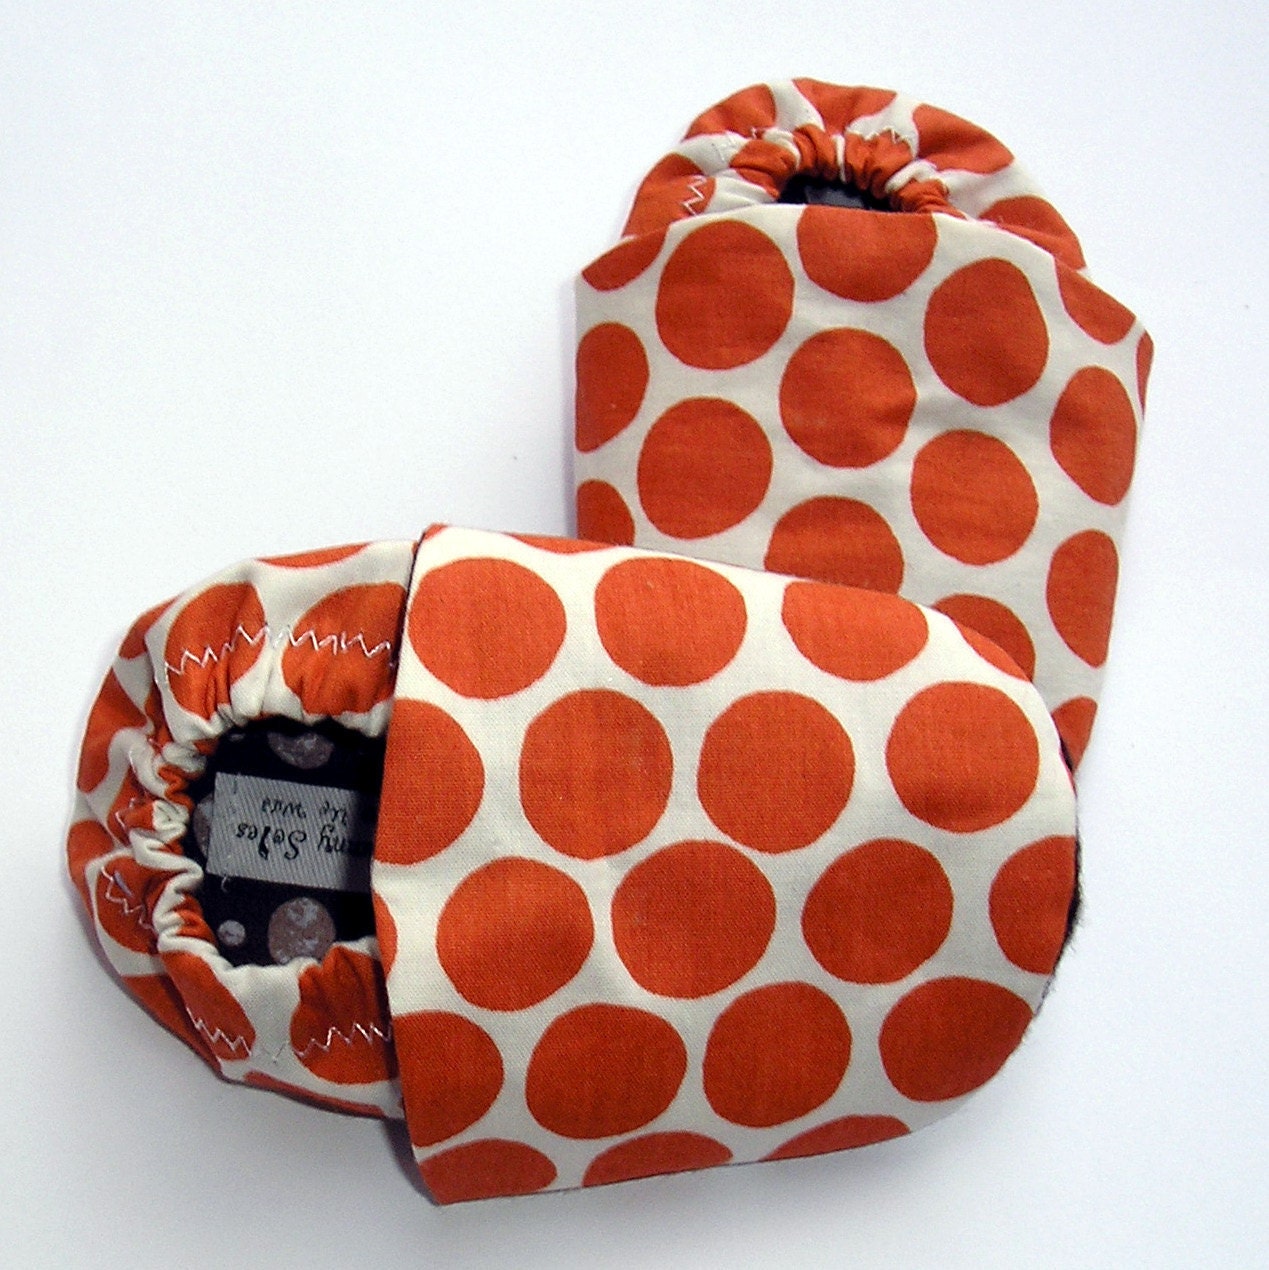 Unisex Crib Shoes in Orange Rust Dot with Organic Cotton Lining- Size 0 3 6 9 12 18 24 months